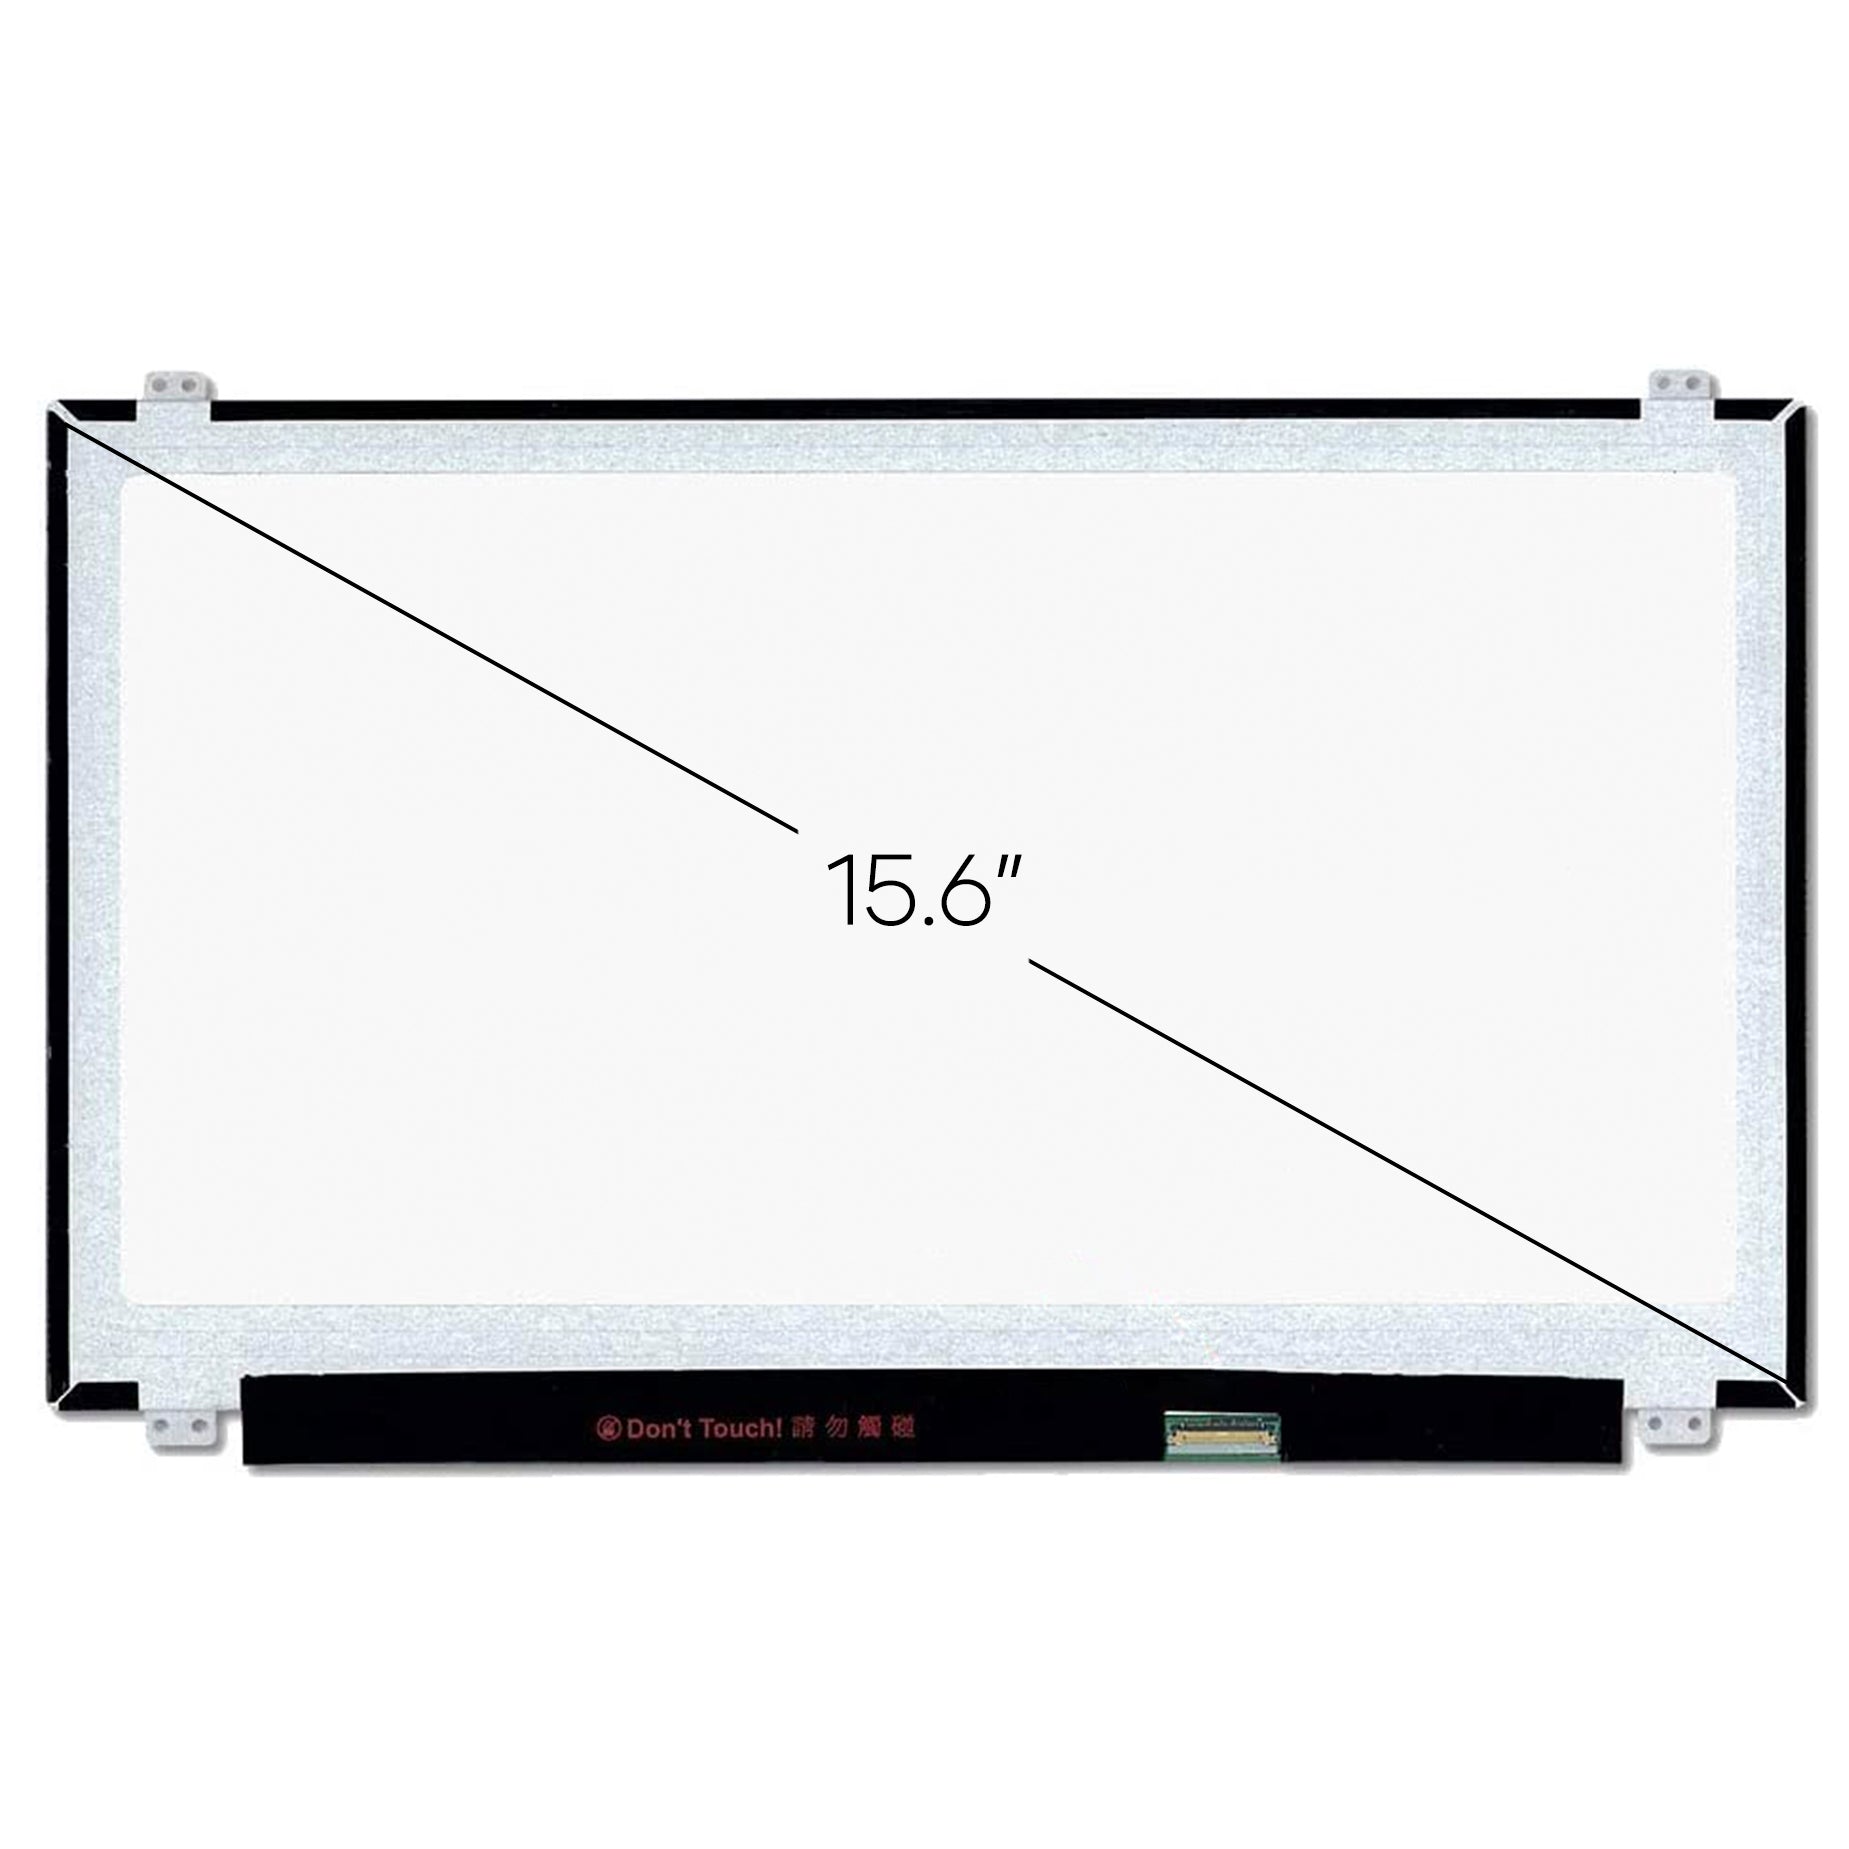 Screen Replacement for B156HTN03.4 FHD 1920x1080 Matte LCD LED Display